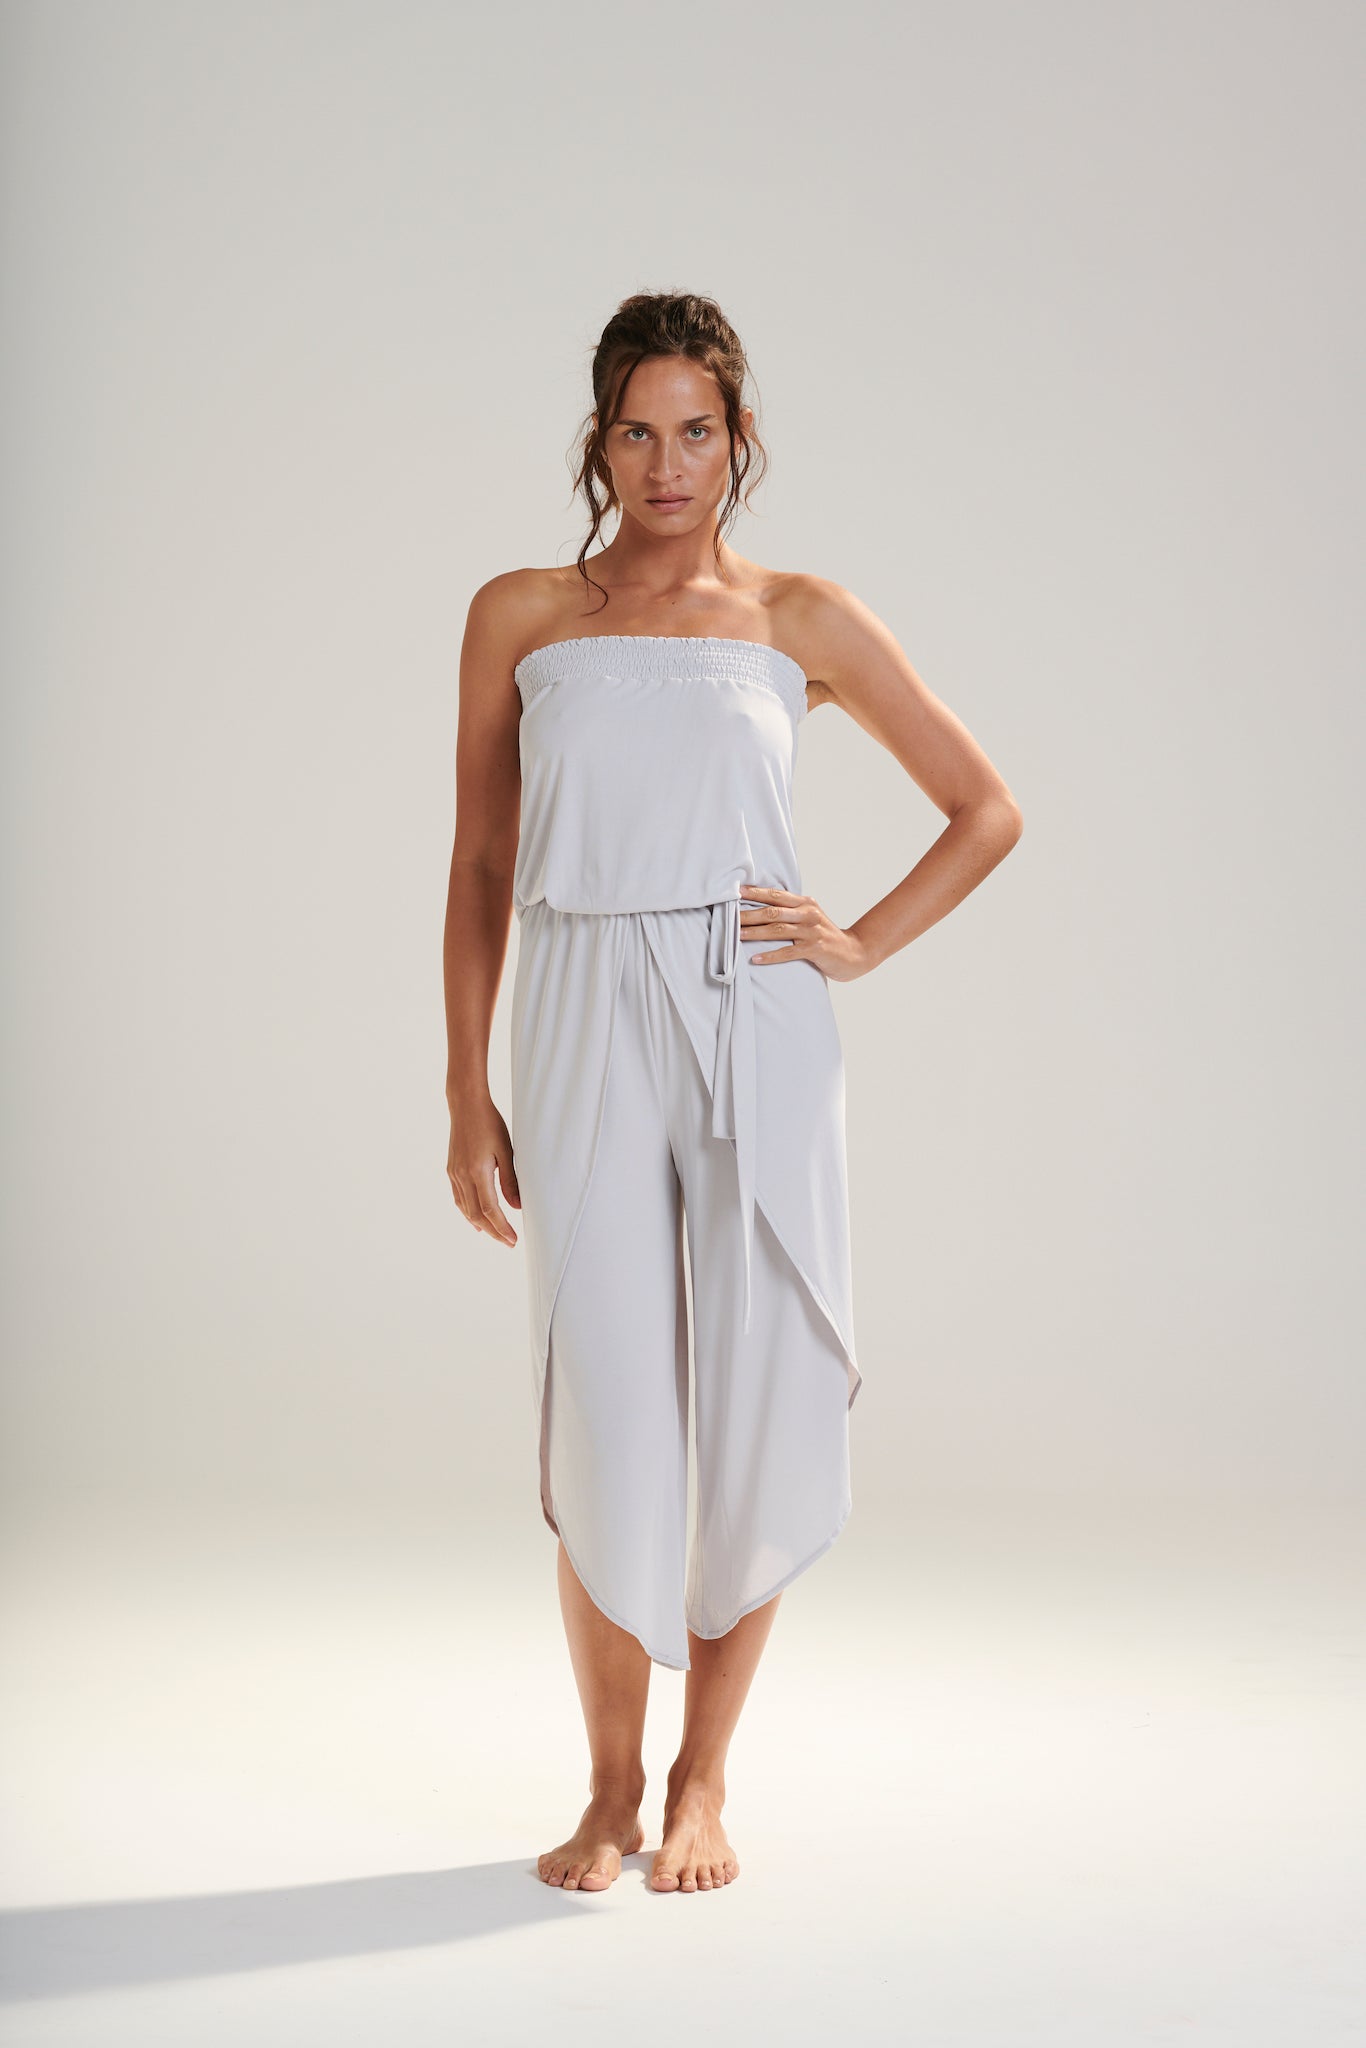 FREYA JUMPSUIT BEECHWOOD MODAL JERSEY SHIRRED BODICE AND PETAL WRAP LEG WITH ELASTIC WAIST AND REMOVABLE TIE IN WISP WASHED PALE GREY FRONT VIEW